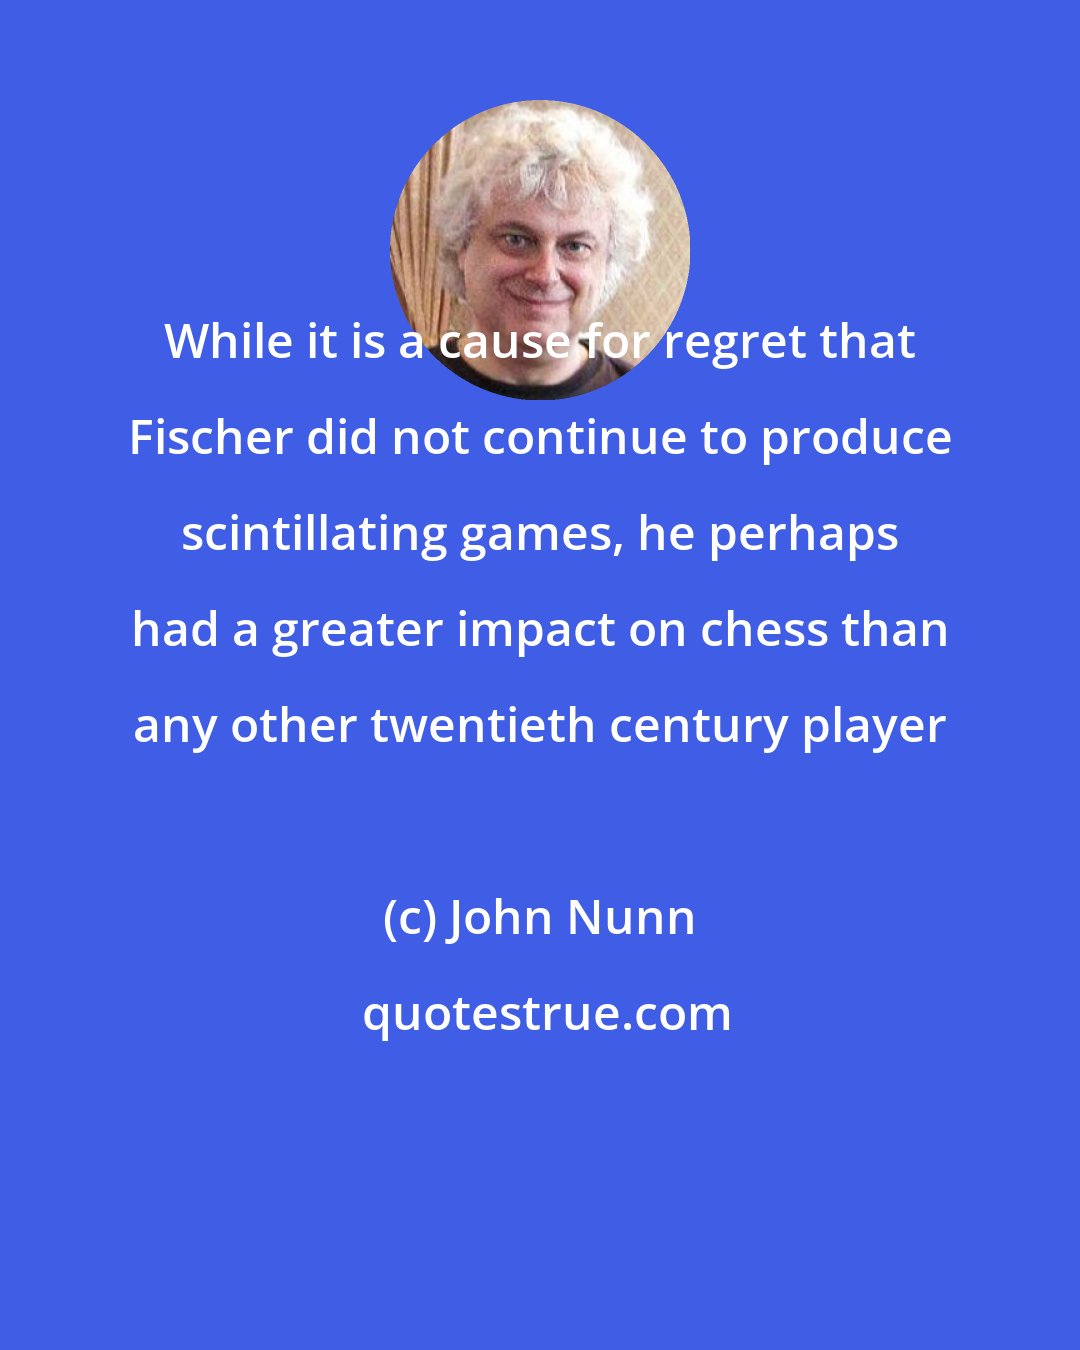 John Nunn: While it is a cause for regret that Fischer did not continue to produce scintillating games, he perhaps had a greater impact on chess than any other twentieth century player